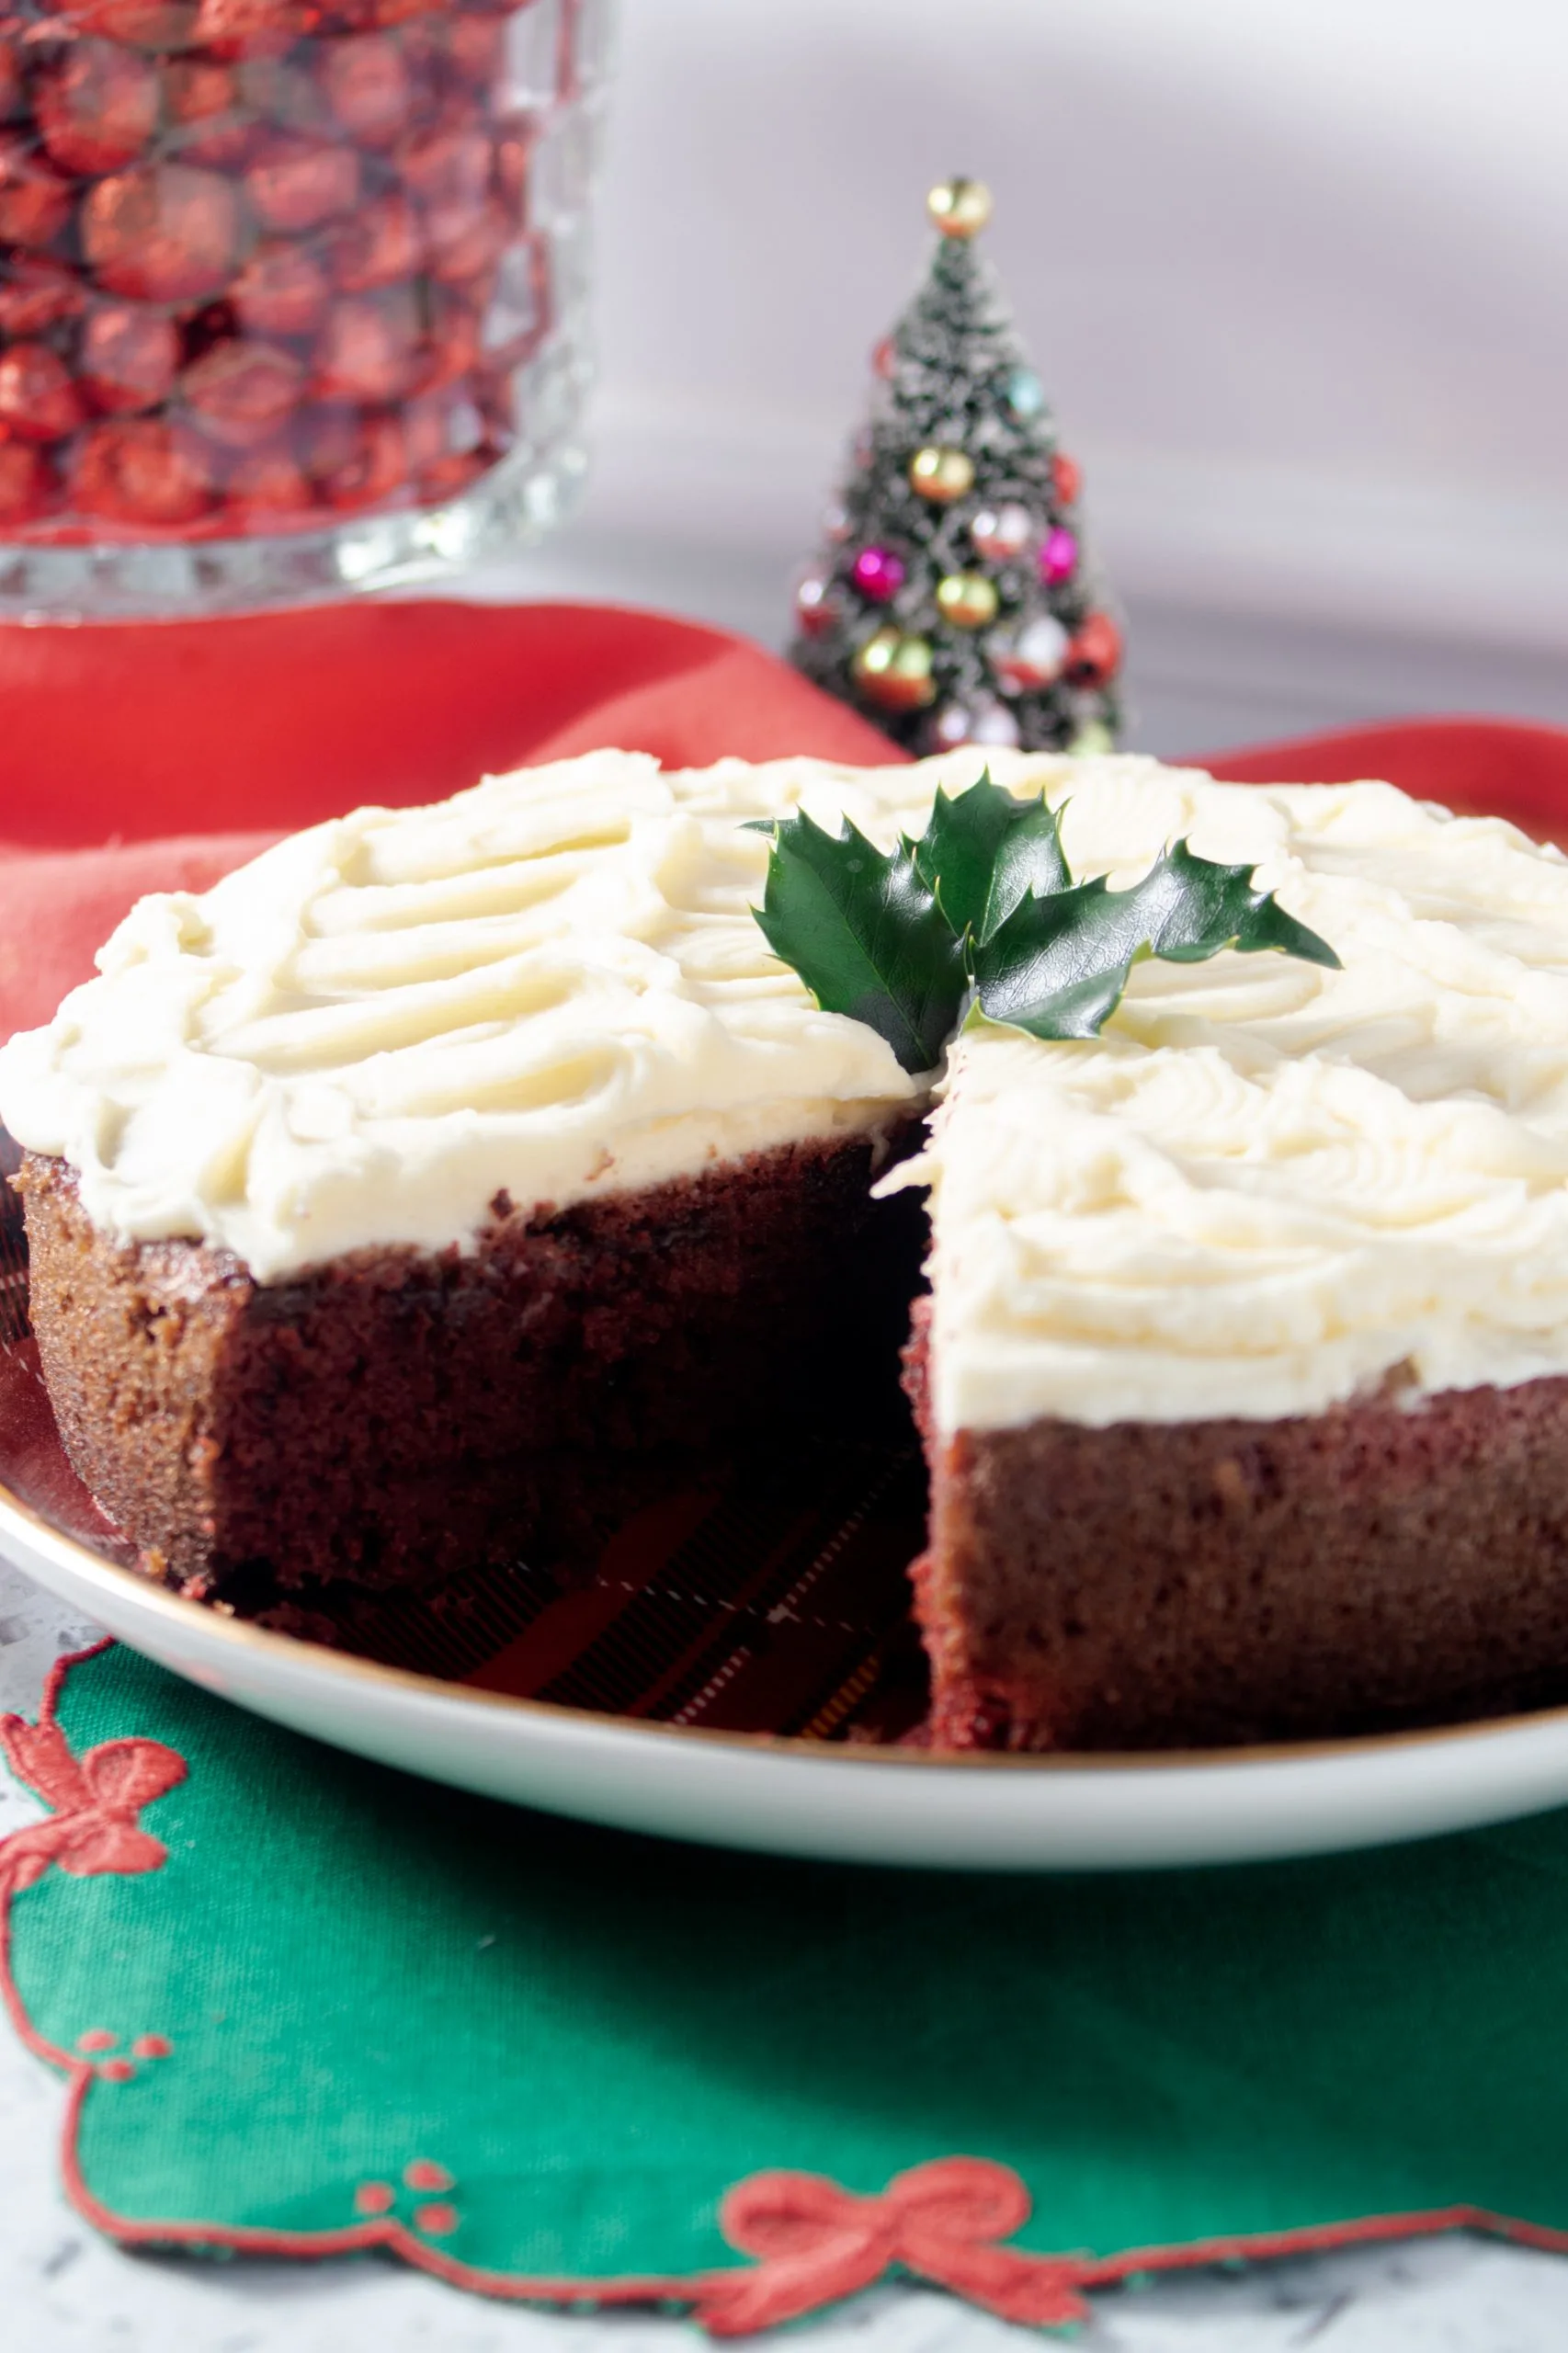 Festive low carb and sugar free red velvet cake.